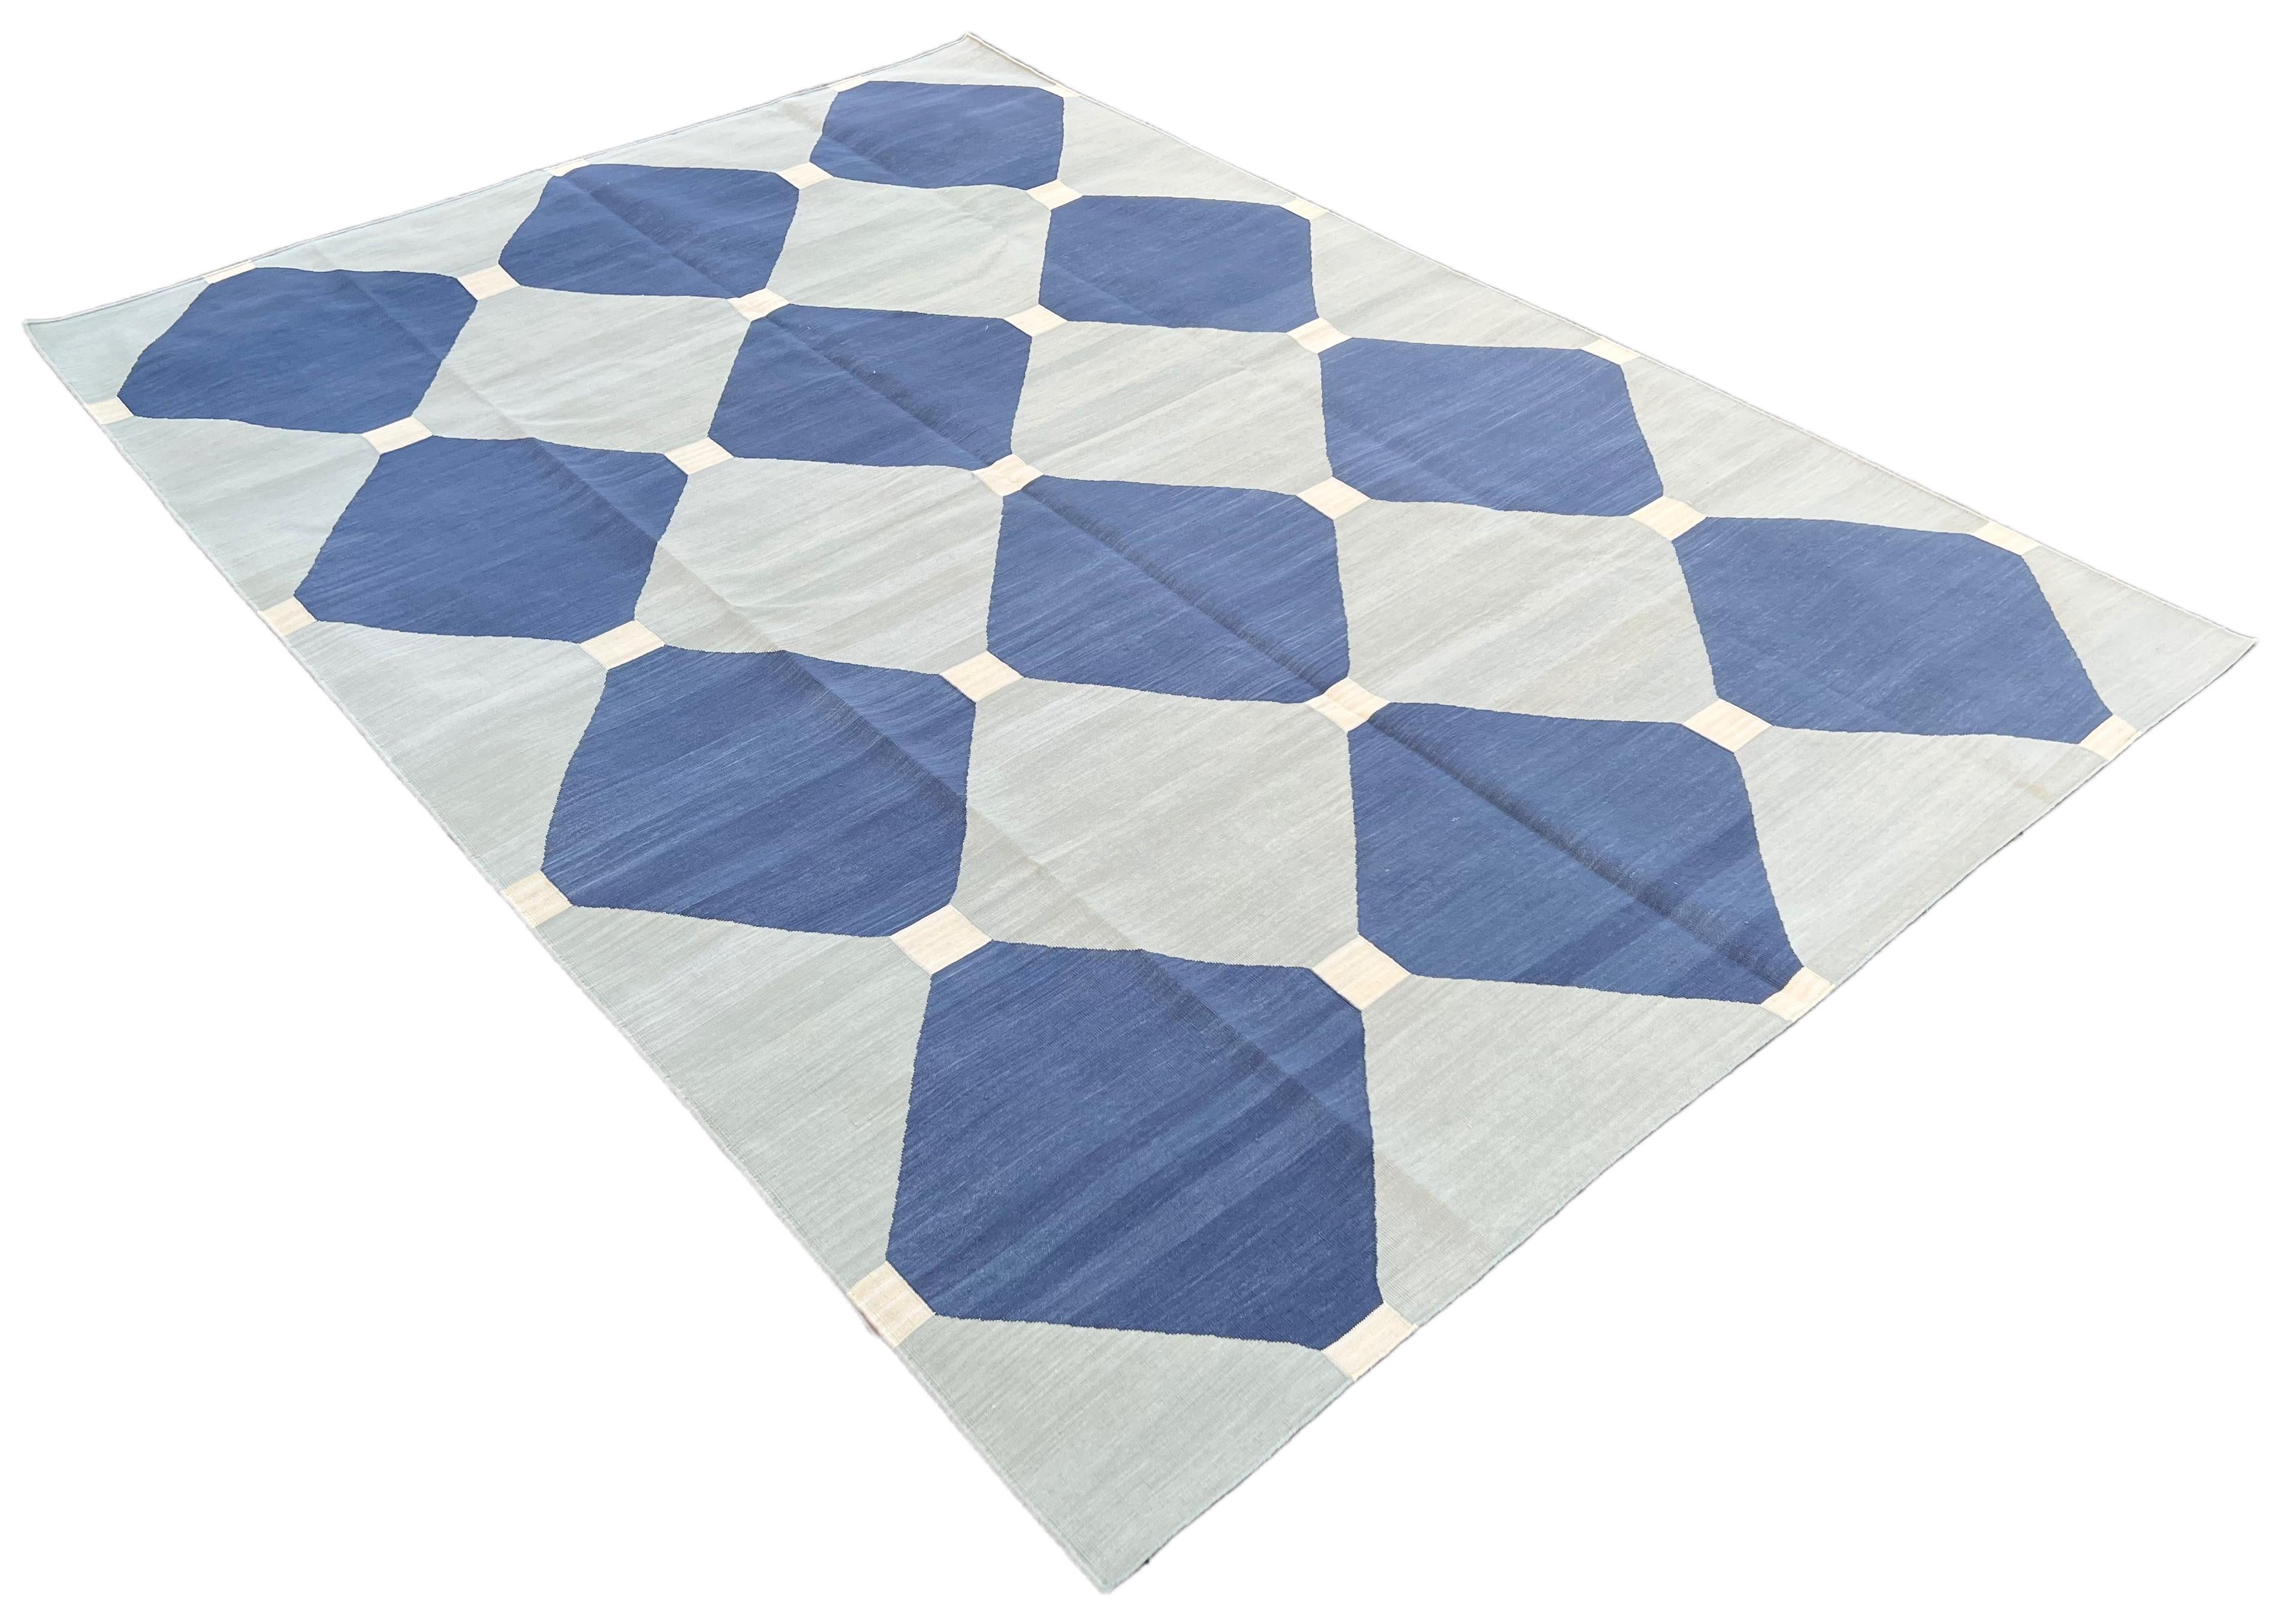 Cotton Vegetable Dyed Reversible Grey And Blue Indian Tile Checked Rug - 6'x9'
These special flat-weave dhurries are hand-woven with 15 ply 100% cotton yarn. Due to the special manufacturing techniques used to create our rugs, the size and color of